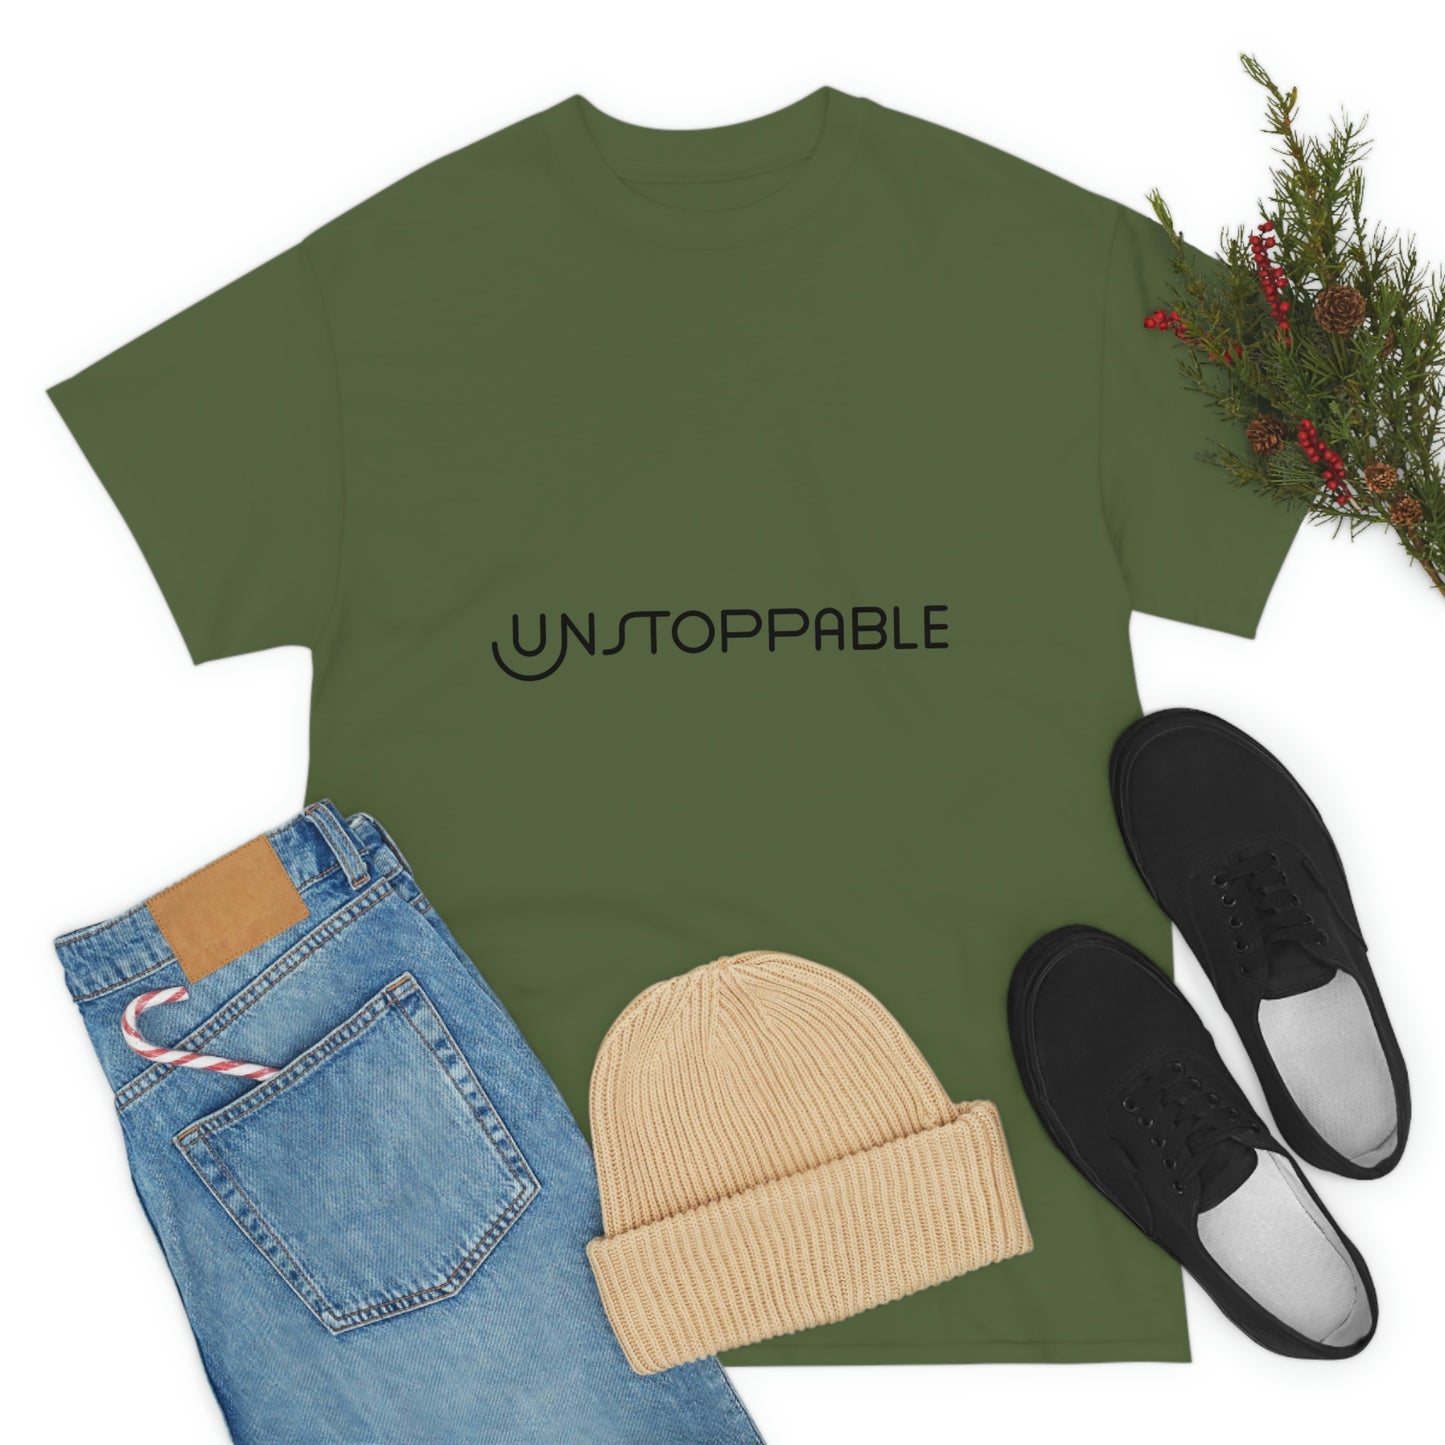 Unstoppable T-shirt